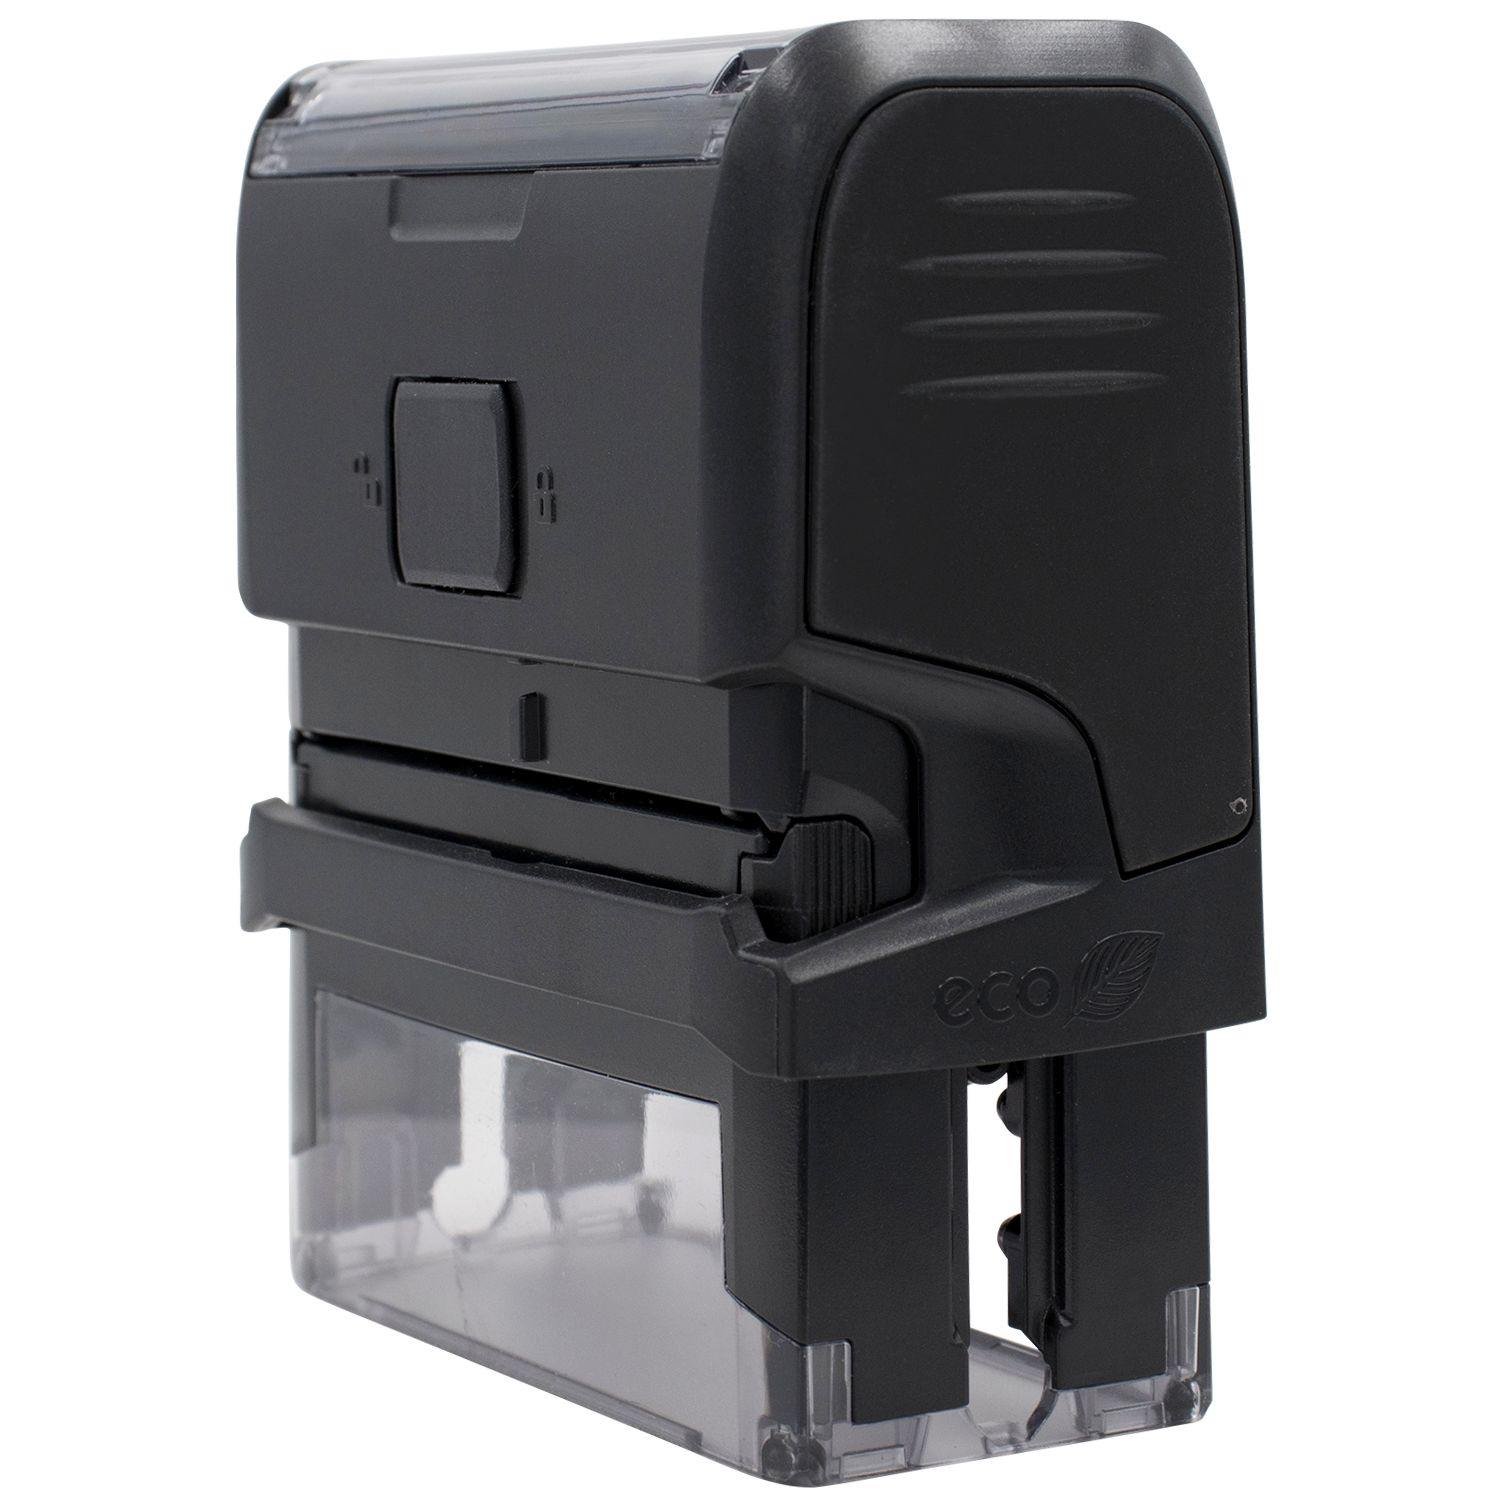 Side View of Large Self-Inking Attorneys' Copy Stamp at an Angle